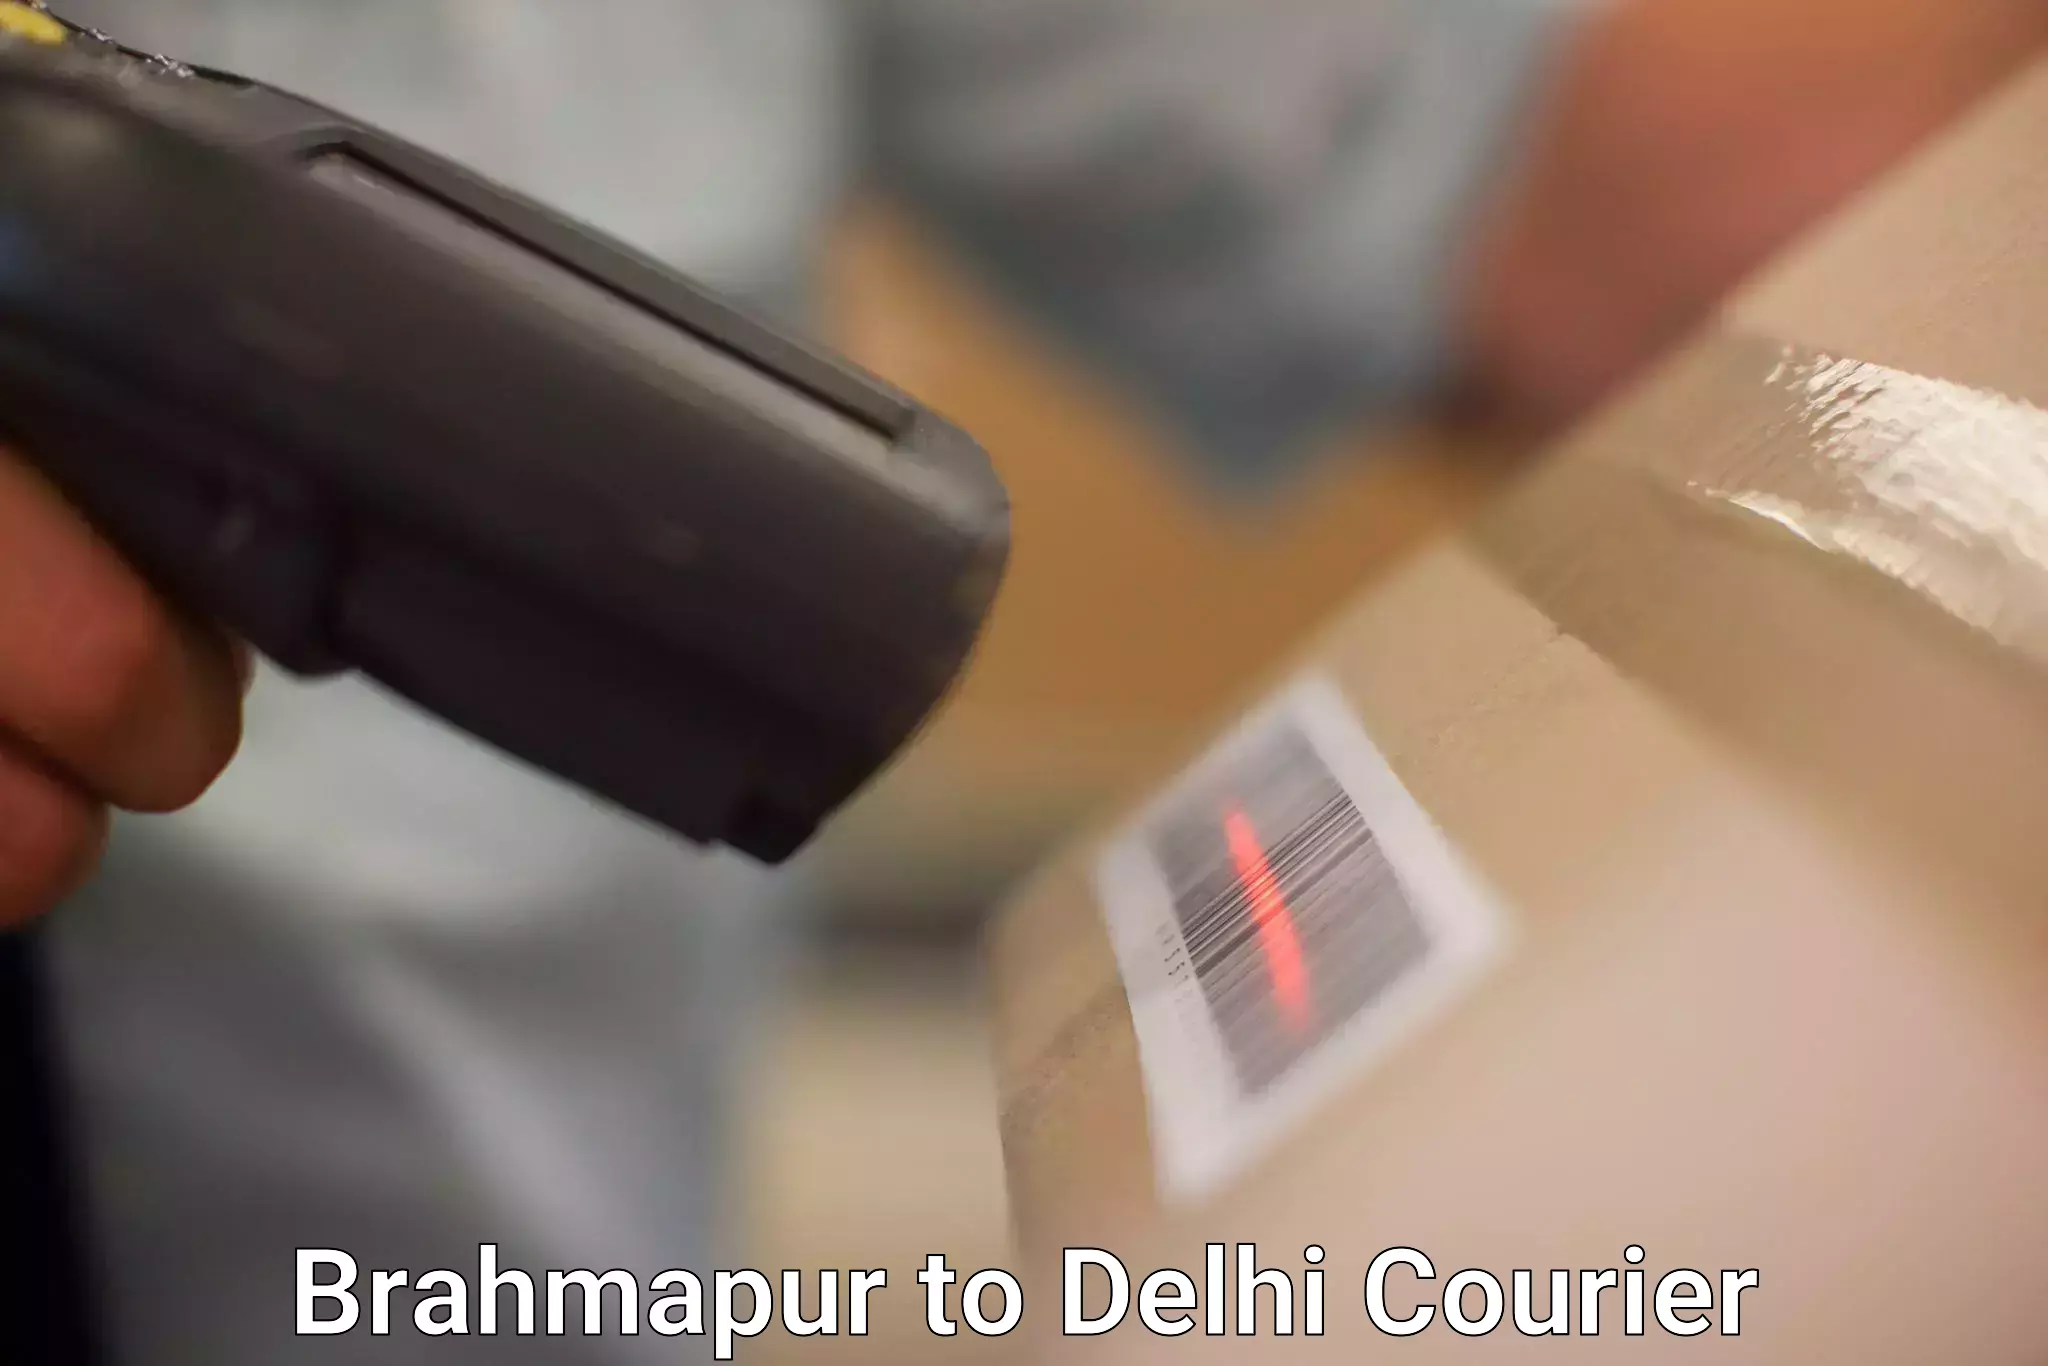 Professional courier handling Brahmapur to NCR